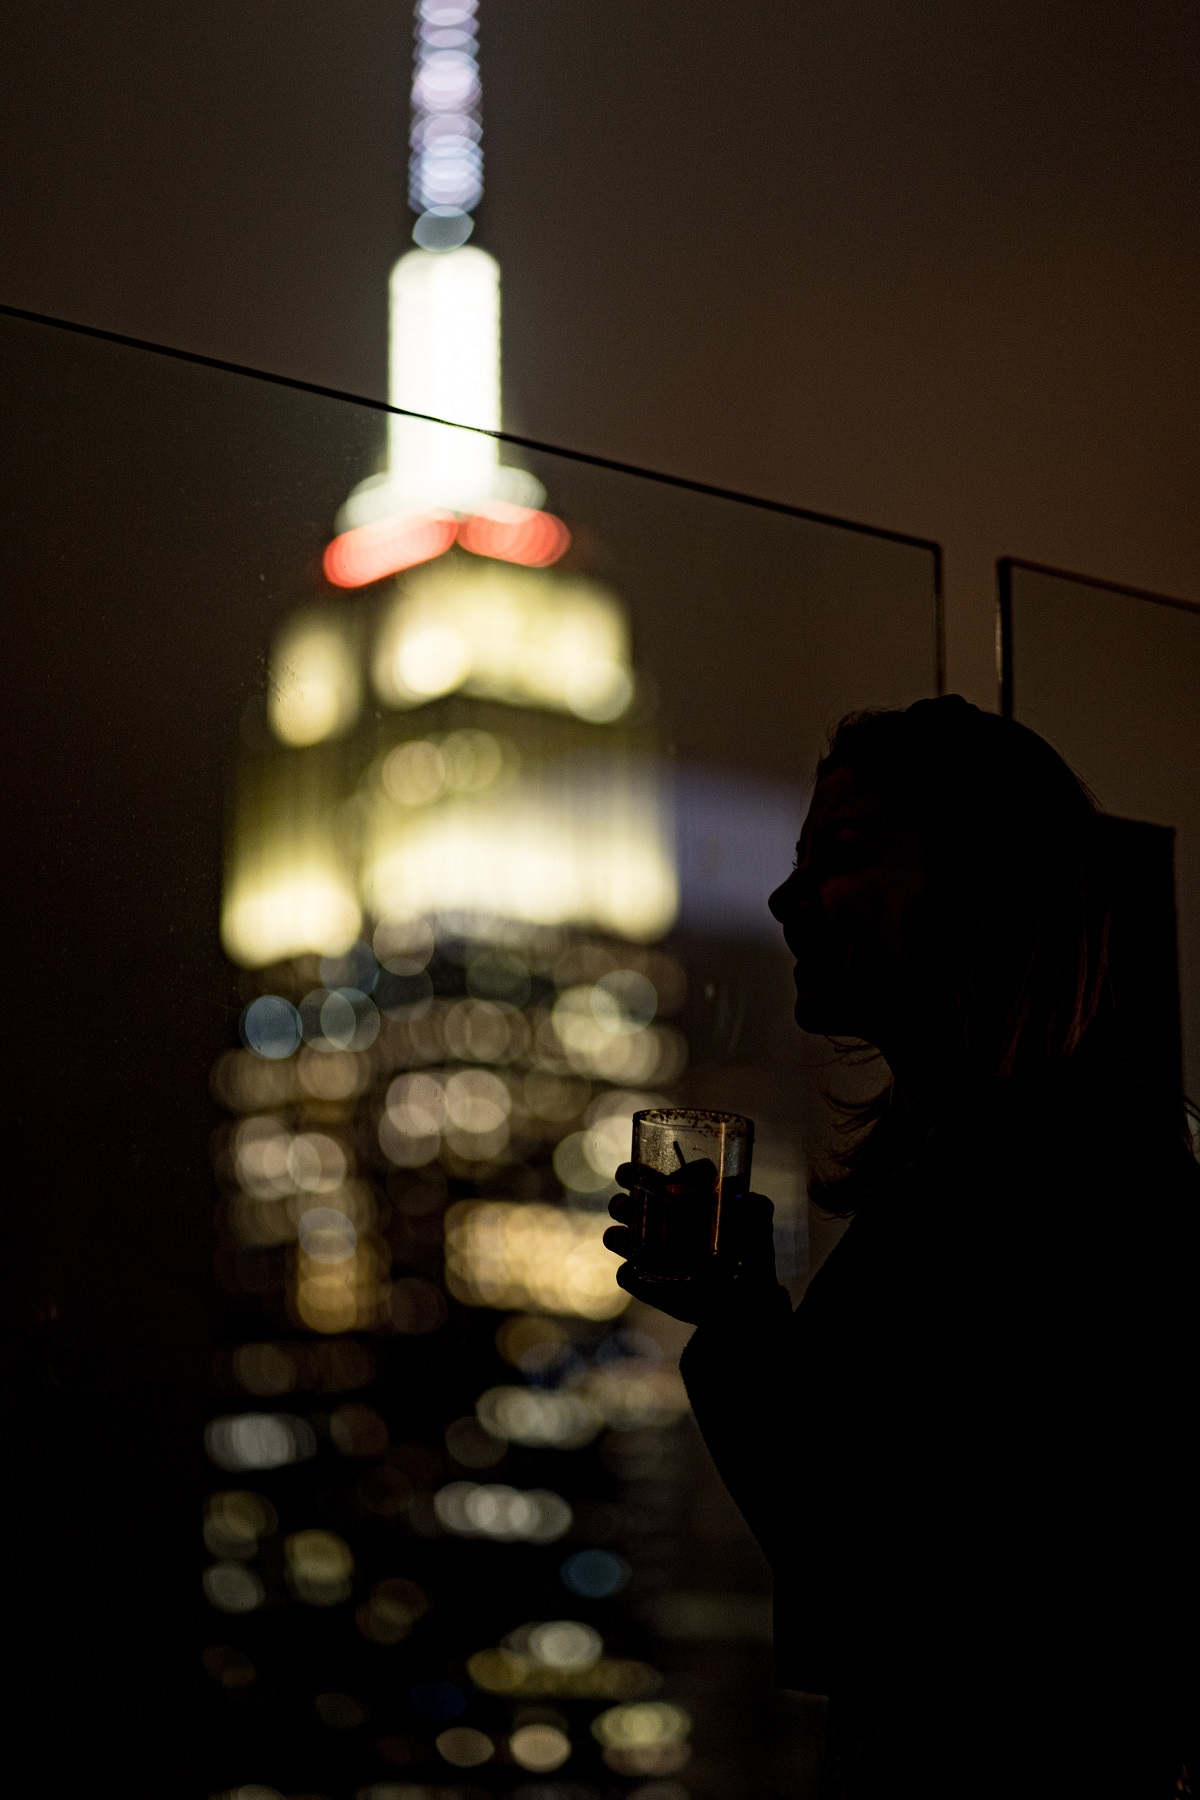 A woman drinks a cocktail at night with the lights of manhattan lighting up the background of the dark photo.